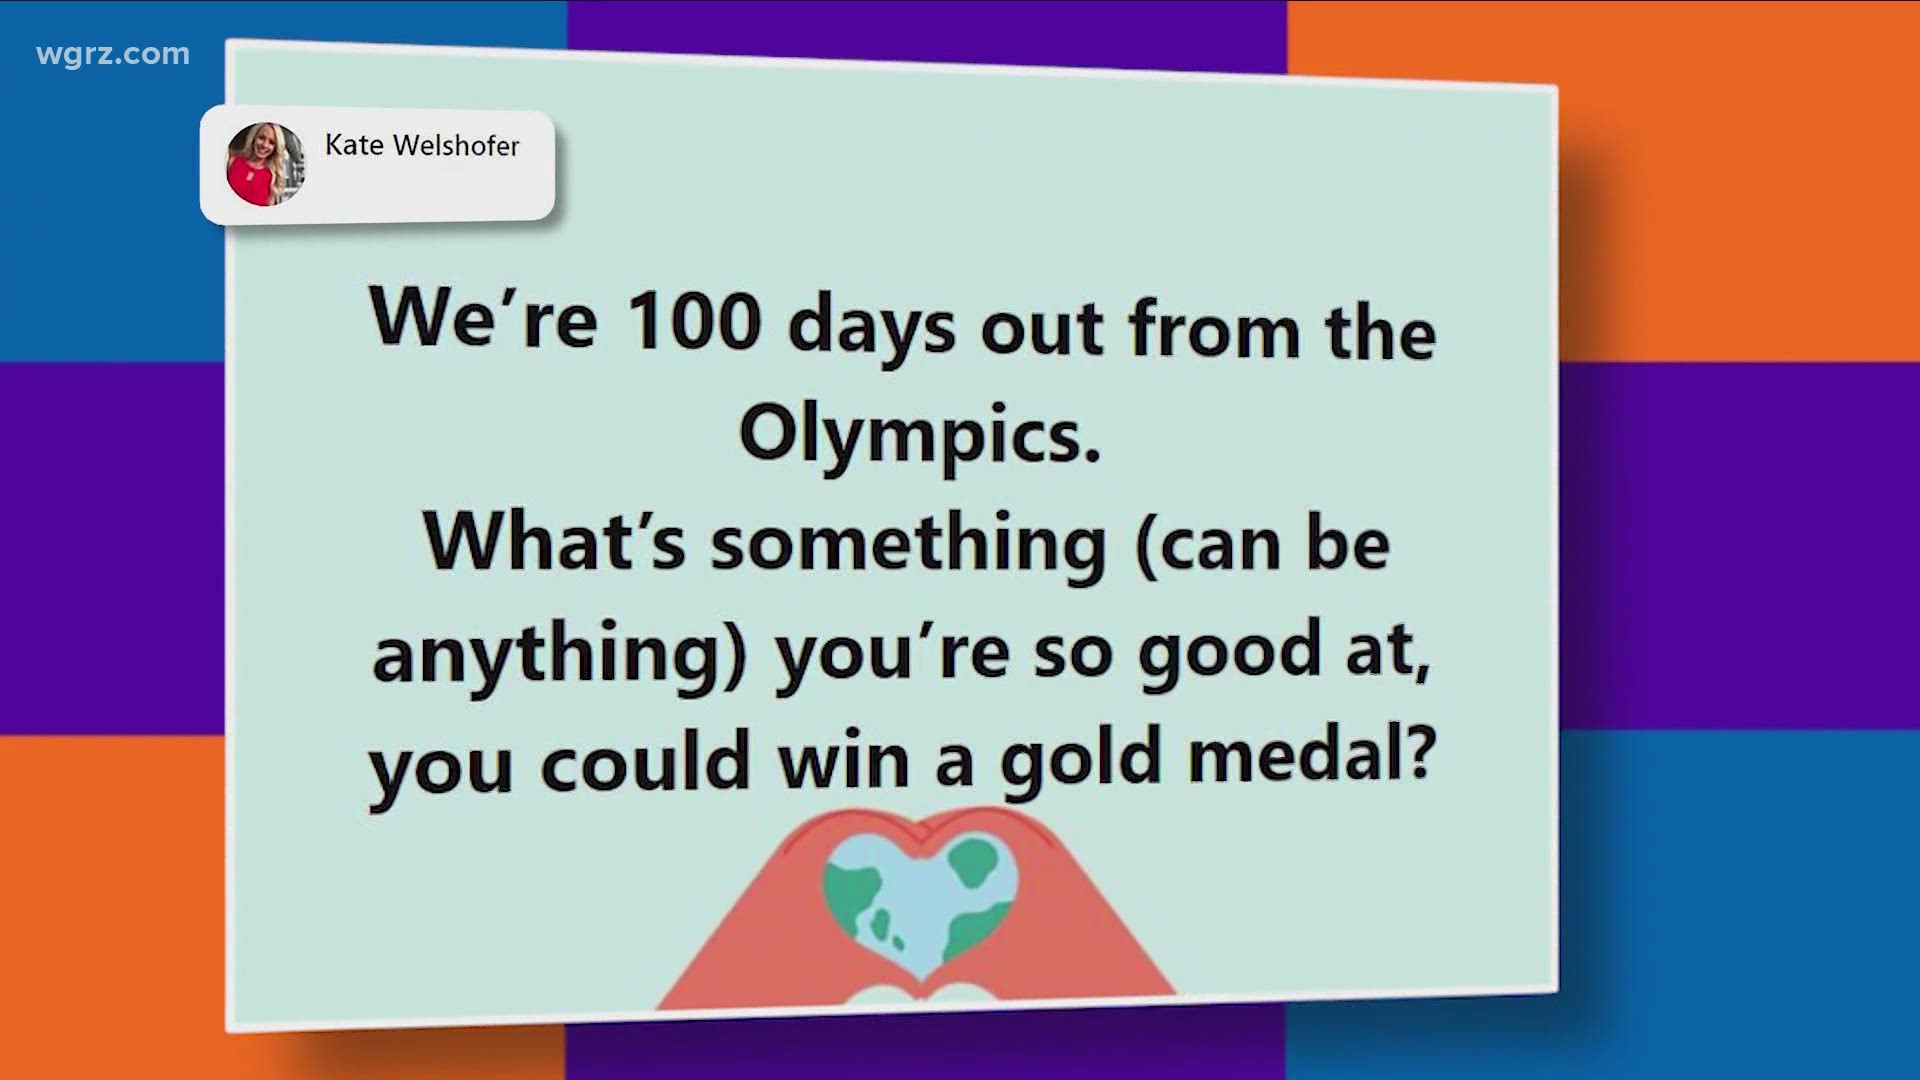 Most Buffalo: 'what could you win a gold medal at?'